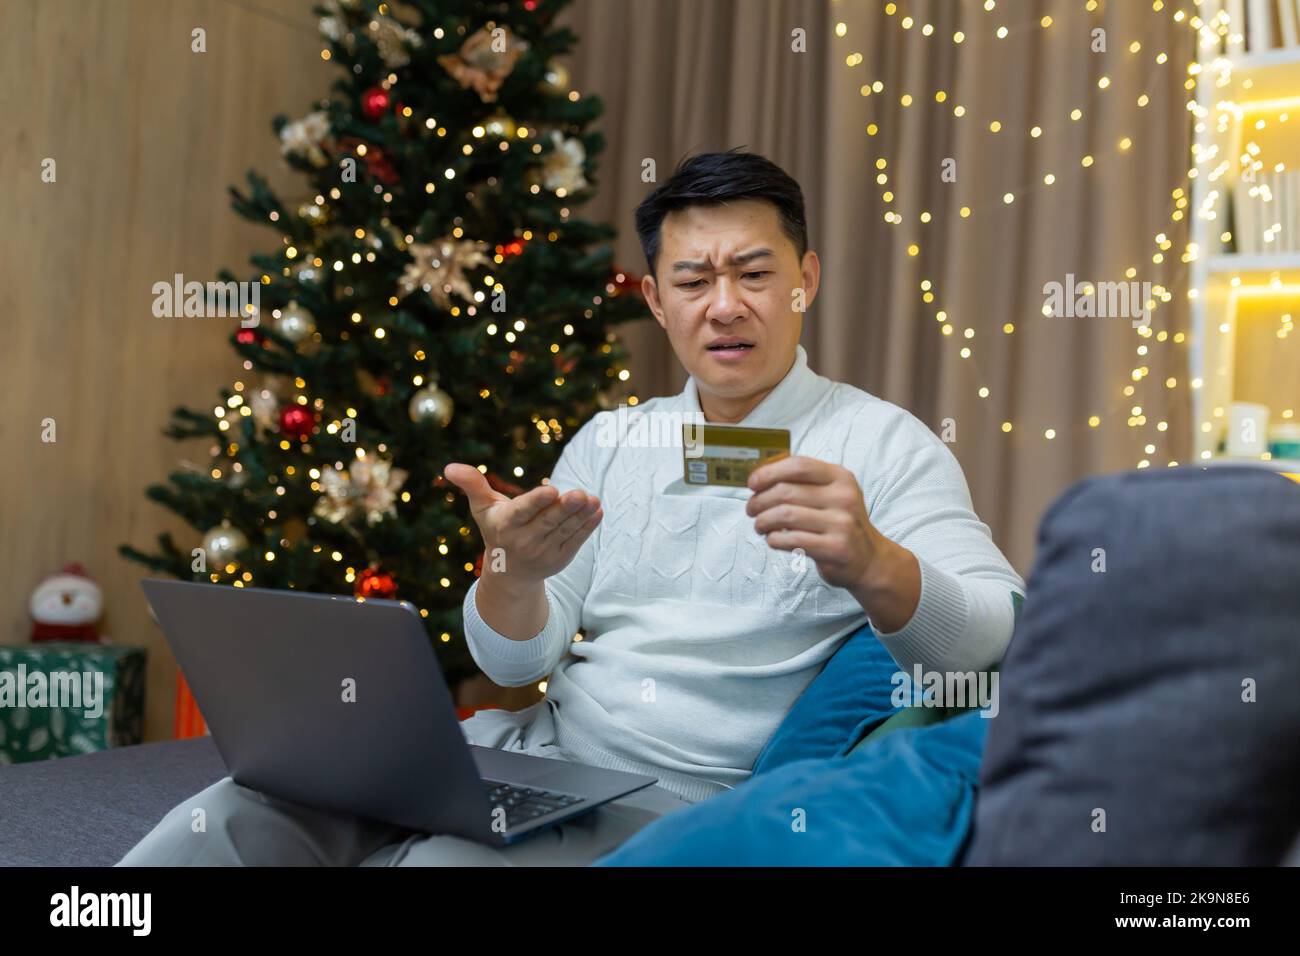 Upset christmas man with laptop trying to make online purchase in online store, asian man holding bank card received error and fraud message, sitting on couch for new year. Stock Photo